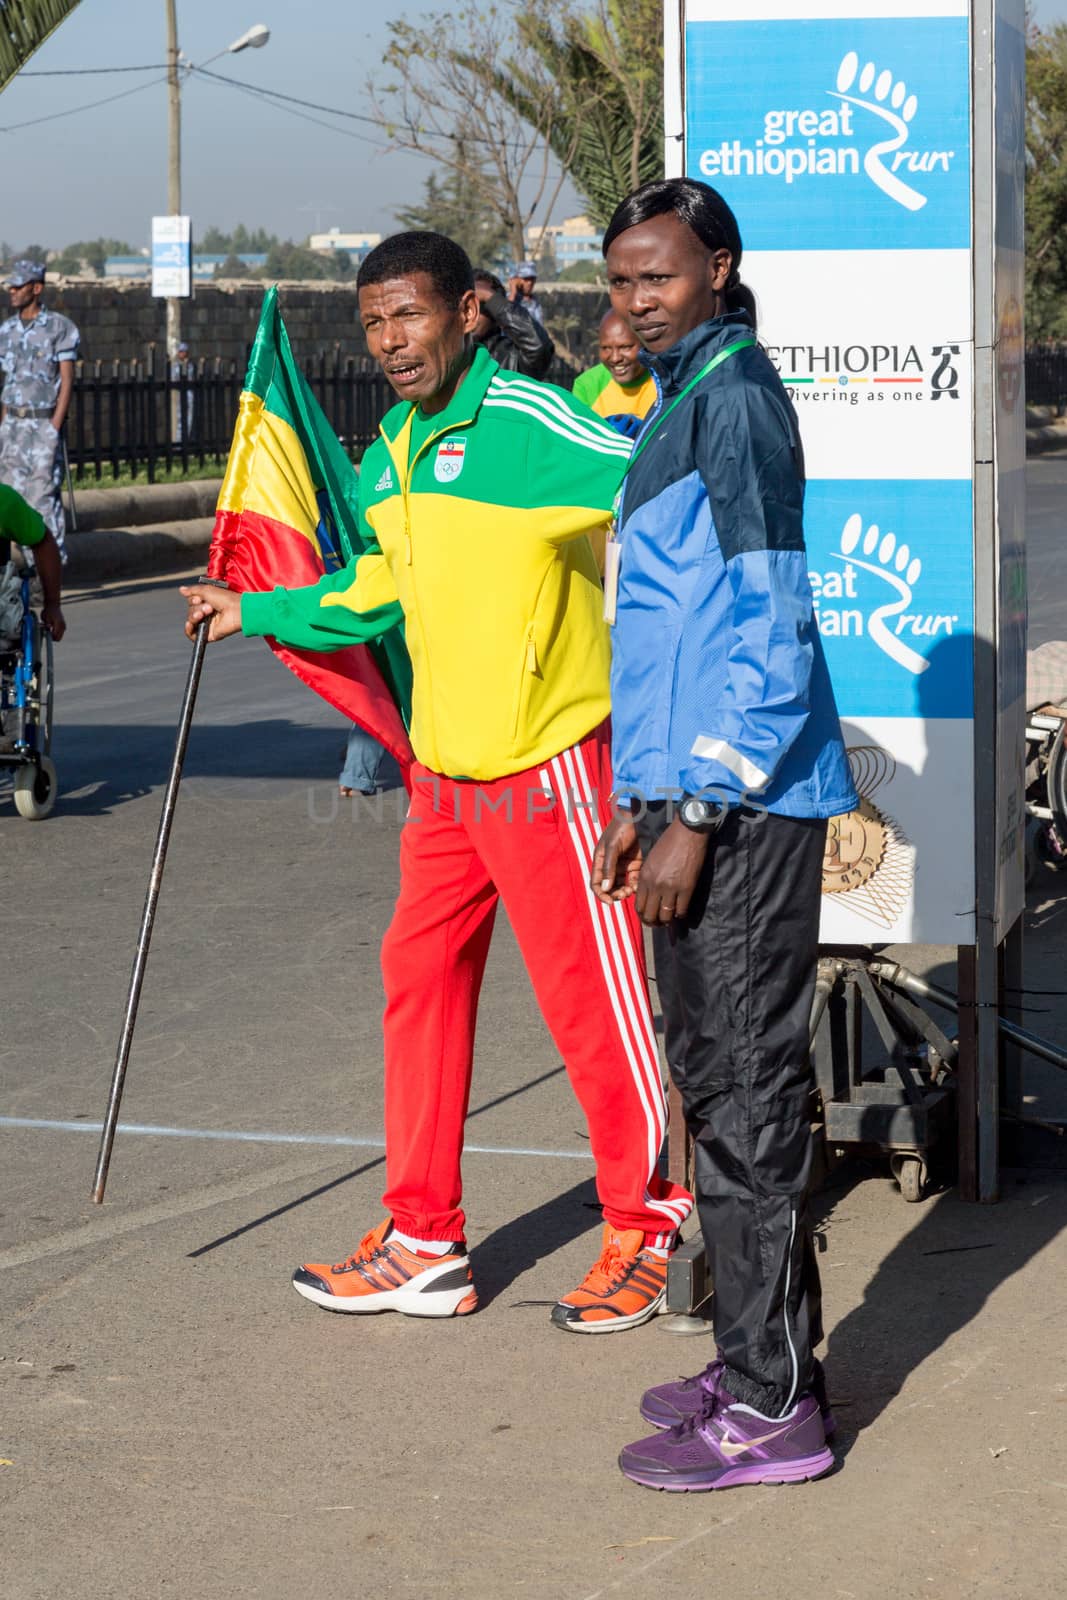 Addis Ababa, Ethiopia – November 24: World renowned athlete Haile Gebrselassie and 2013 NY Marathon winner Priscah Jeptoo at the 13th Edition Ethiopian Great Run, 24th of November 2013 in Addis Ababa, Ethiopia.